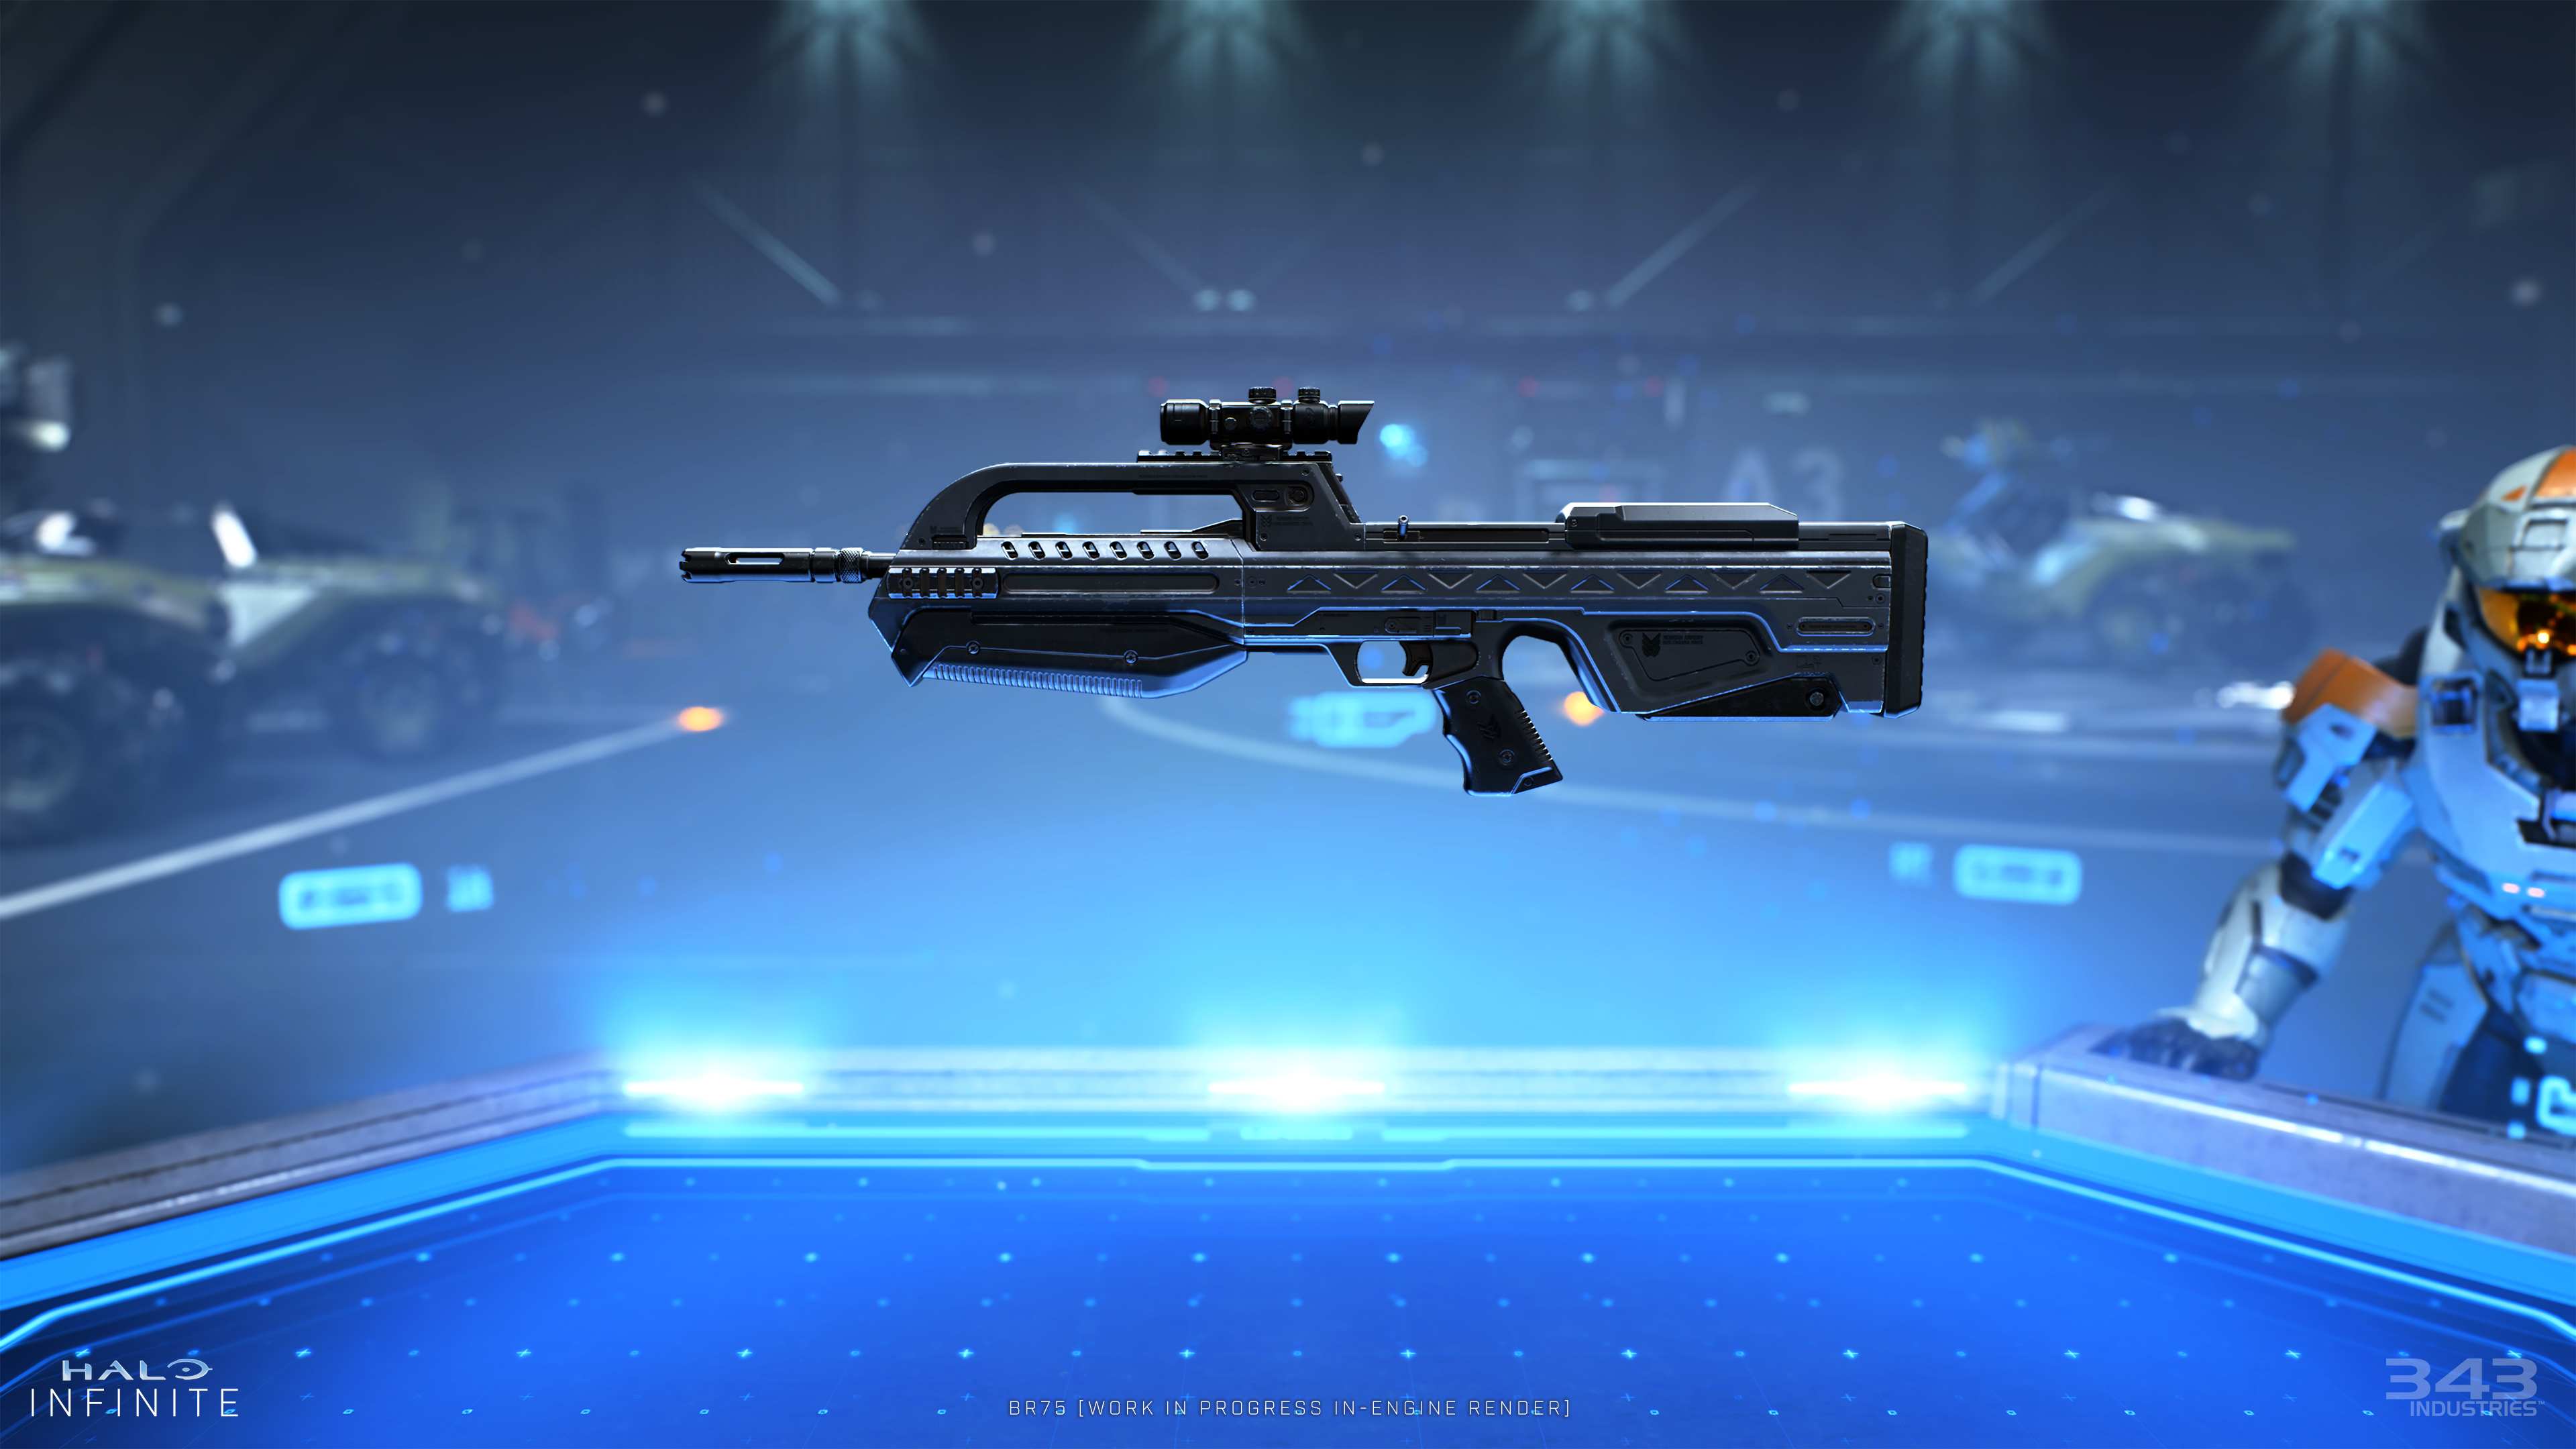 BR75, the starting weapon for Ranked / Competitive play for Halo Infinite